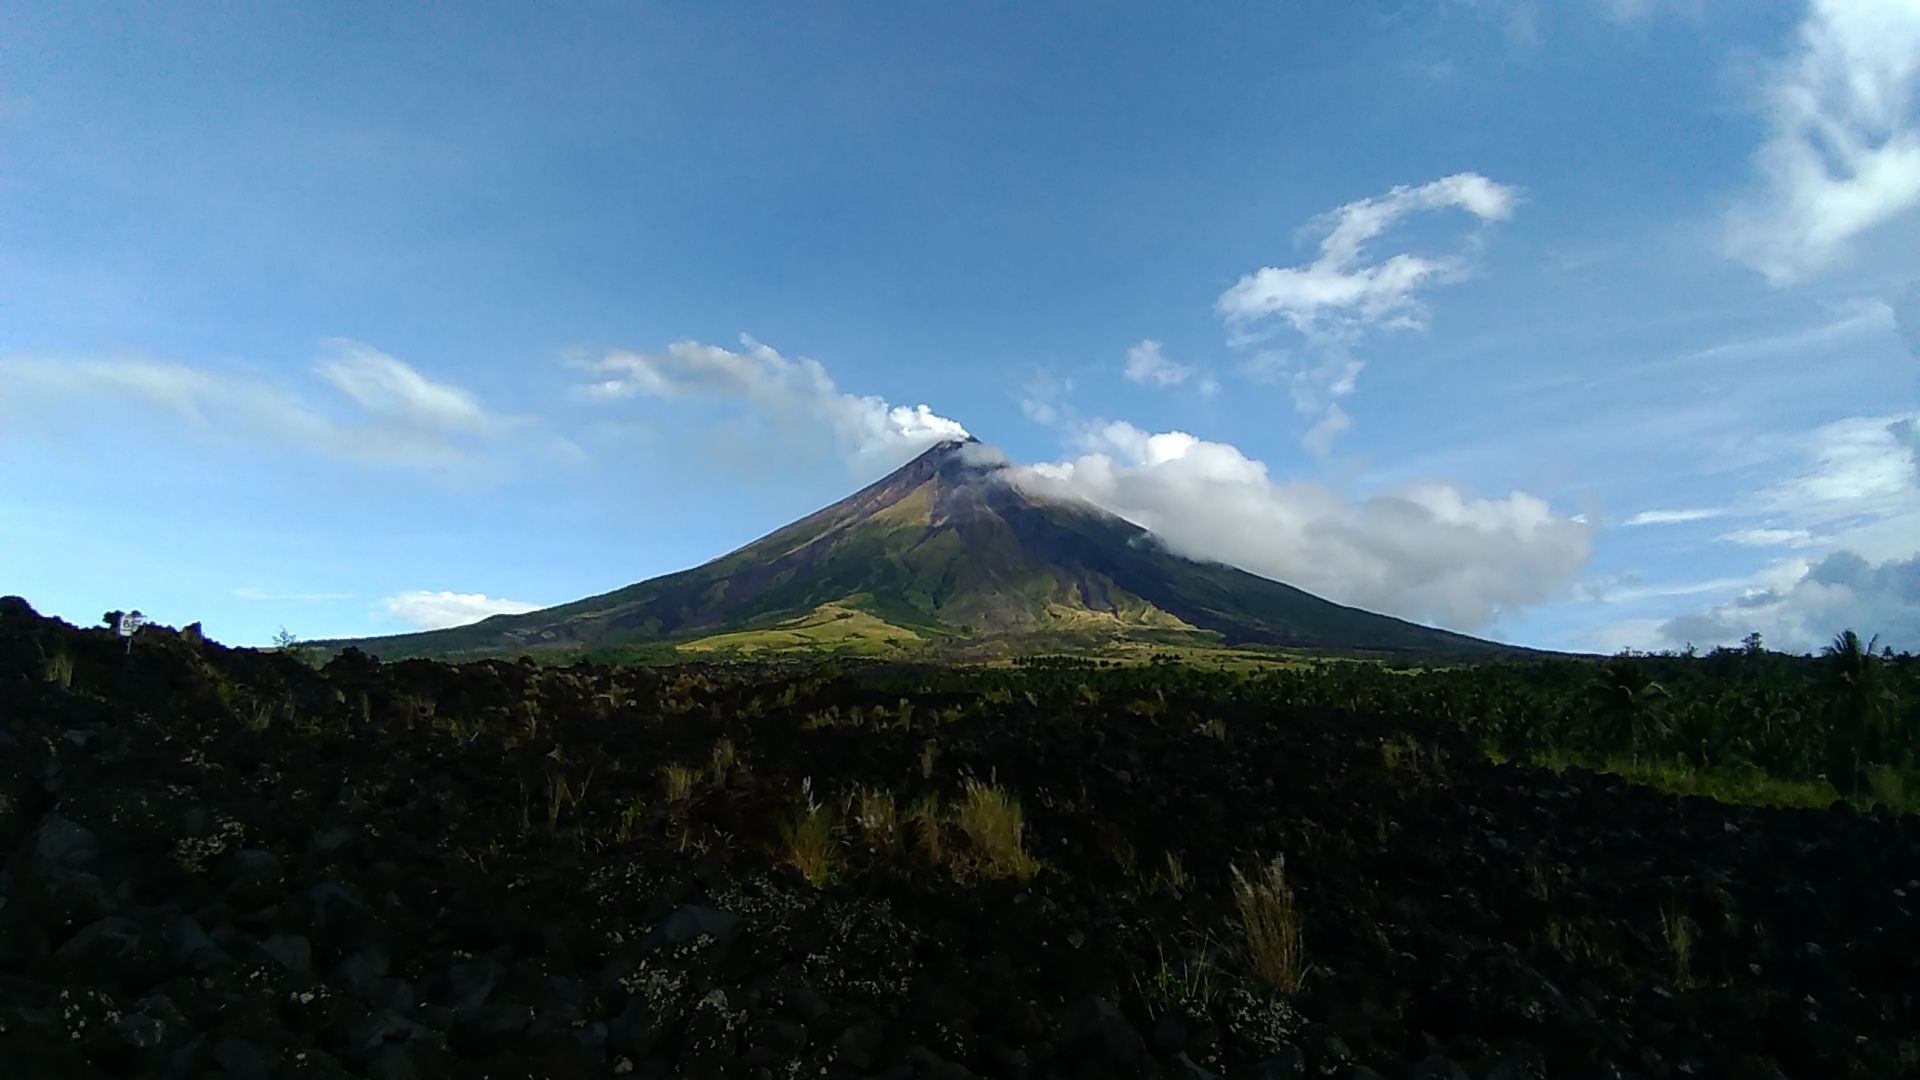 Standing right at the remnants of the 2006 eruption of Mt. Mayon is this breath taking view of the volcano